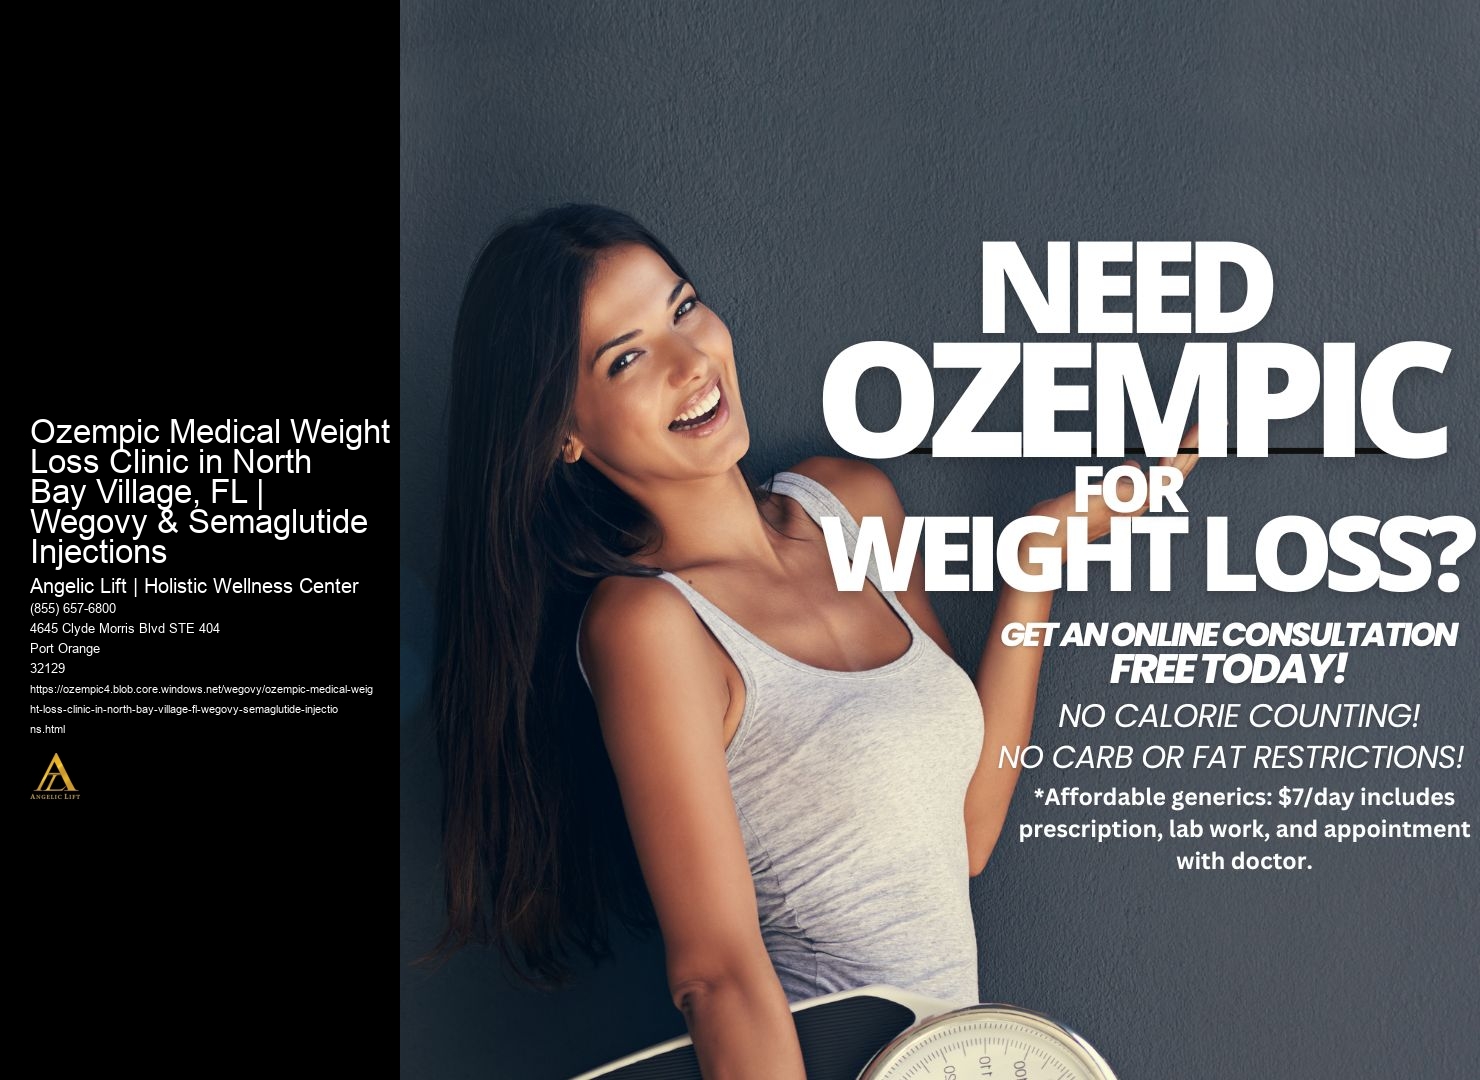 Ozempic Medical Weight Loss Clinic in North Bay Village, FL | Wegovy & Semaglutide Injections